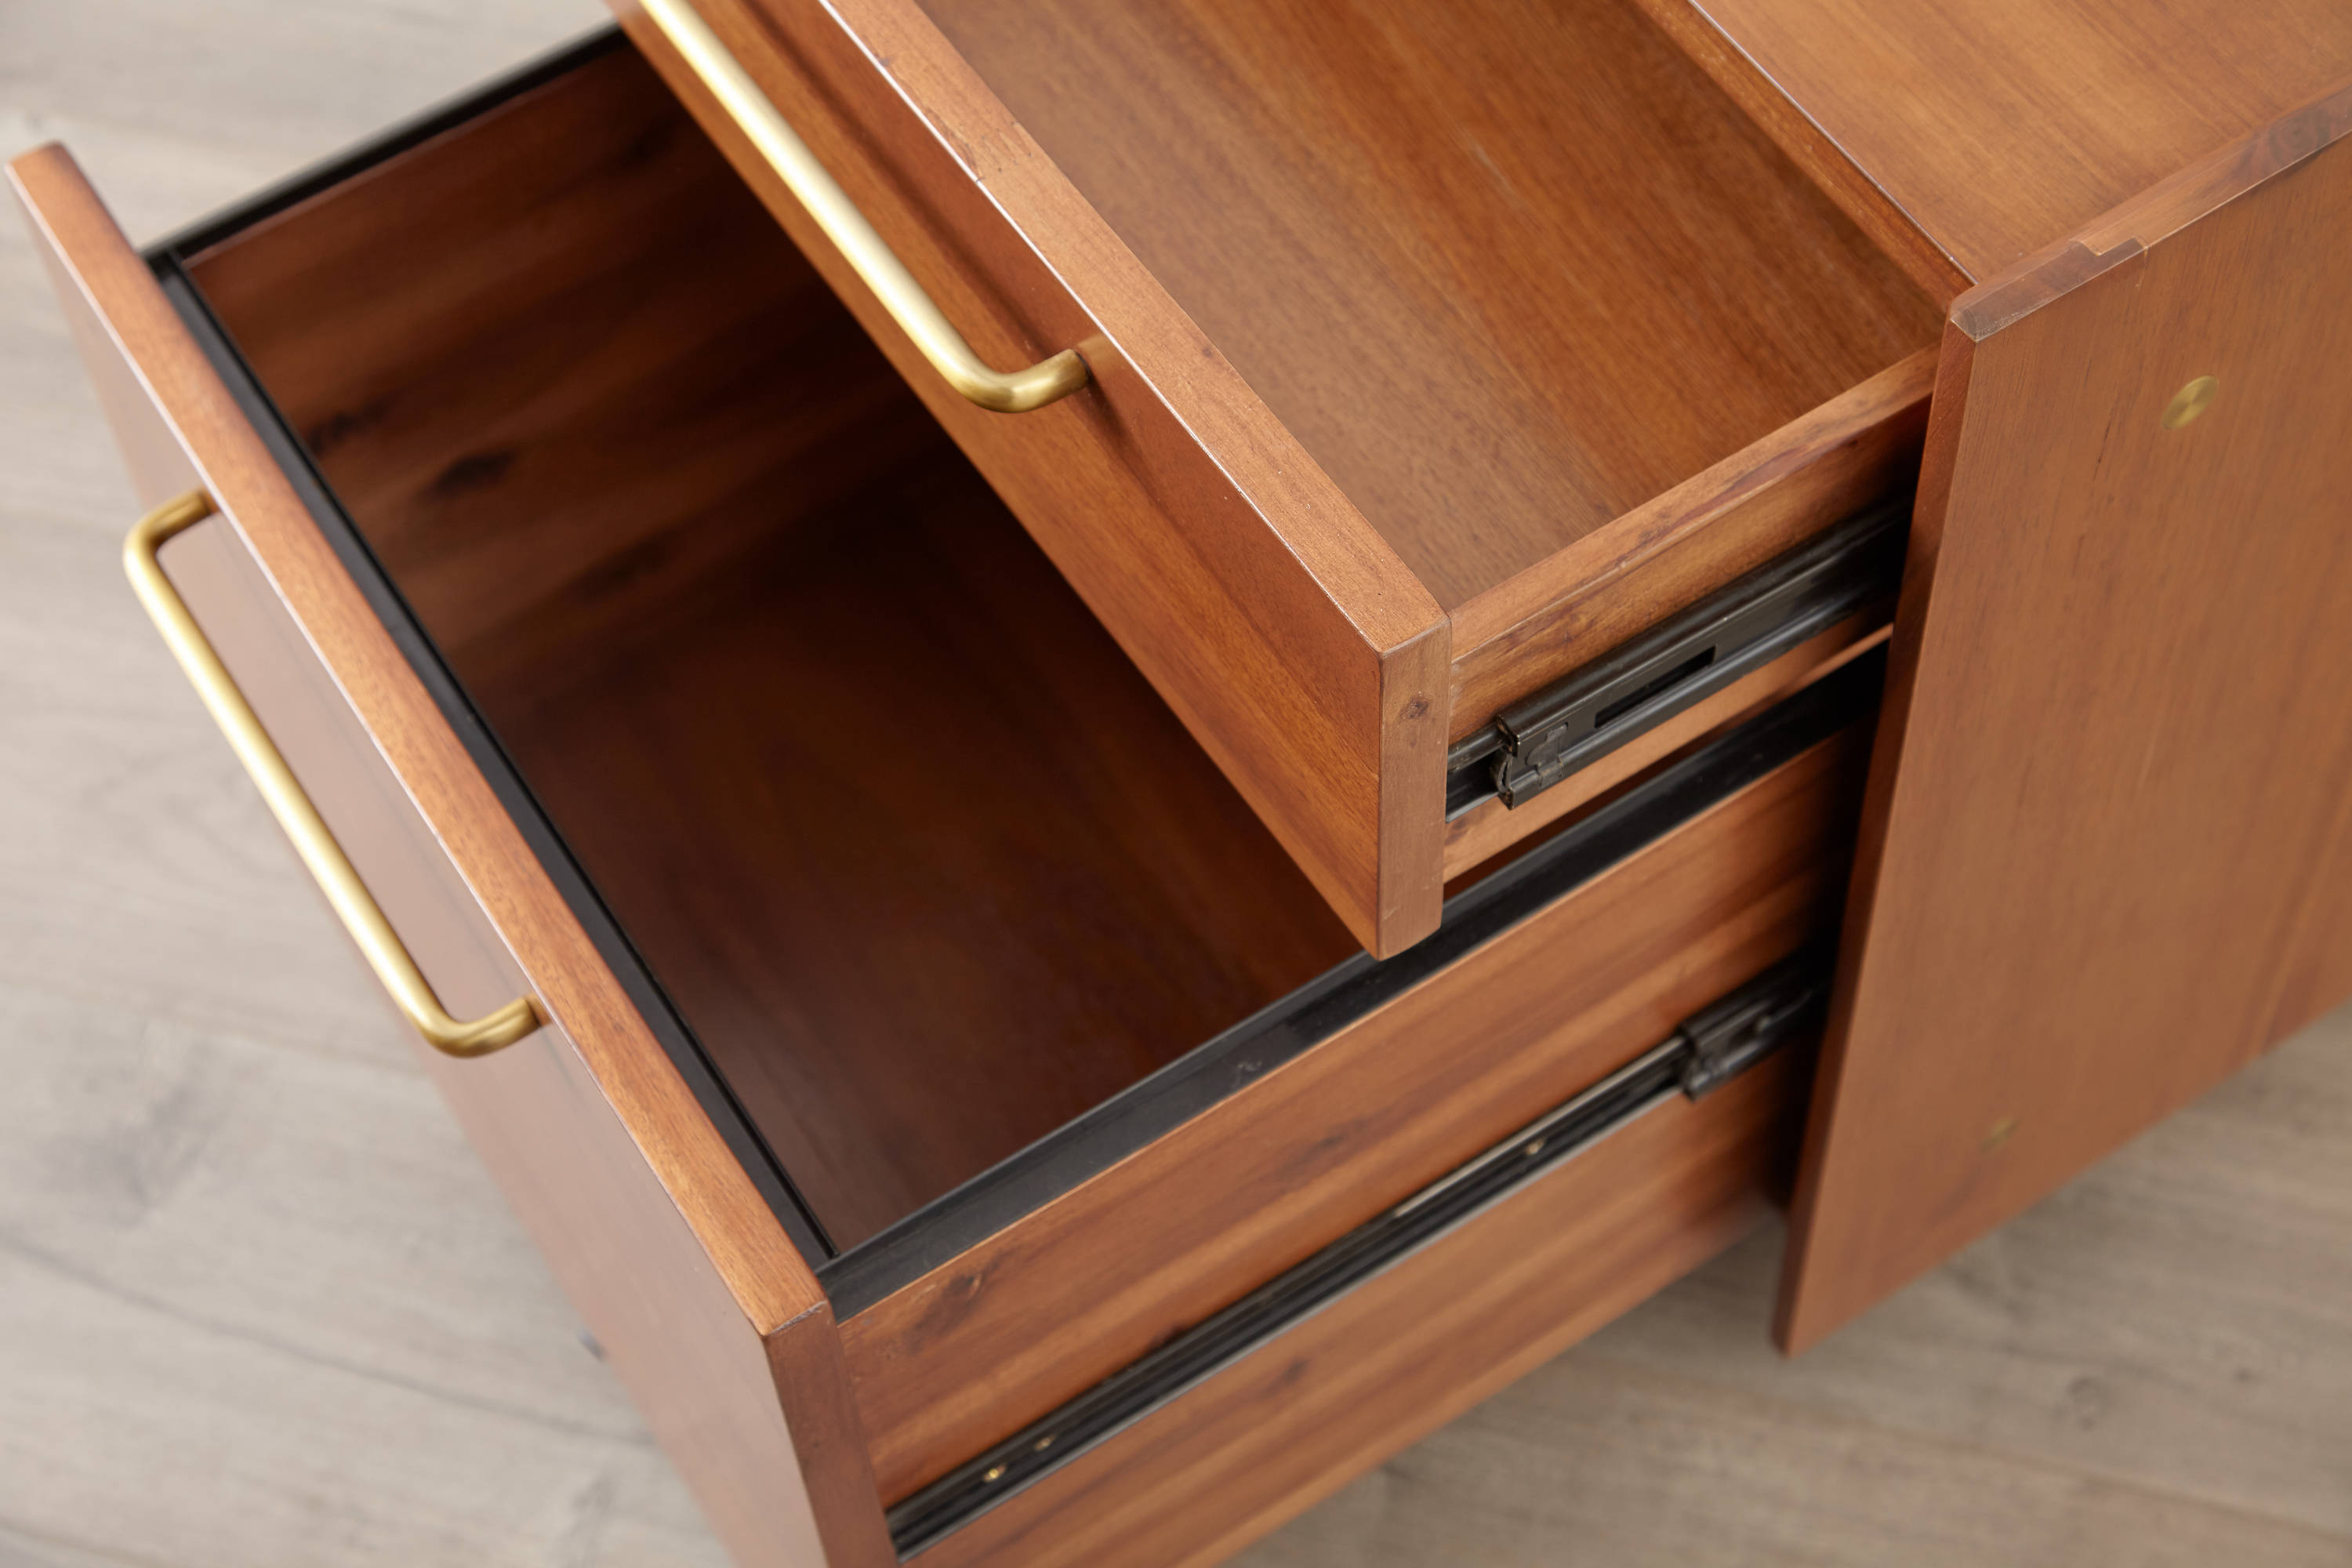 Caridad Mid Century Modern File Cabinet with Mobile Features and Lockable Drawers fit for Home Office Walnut Oak Color 